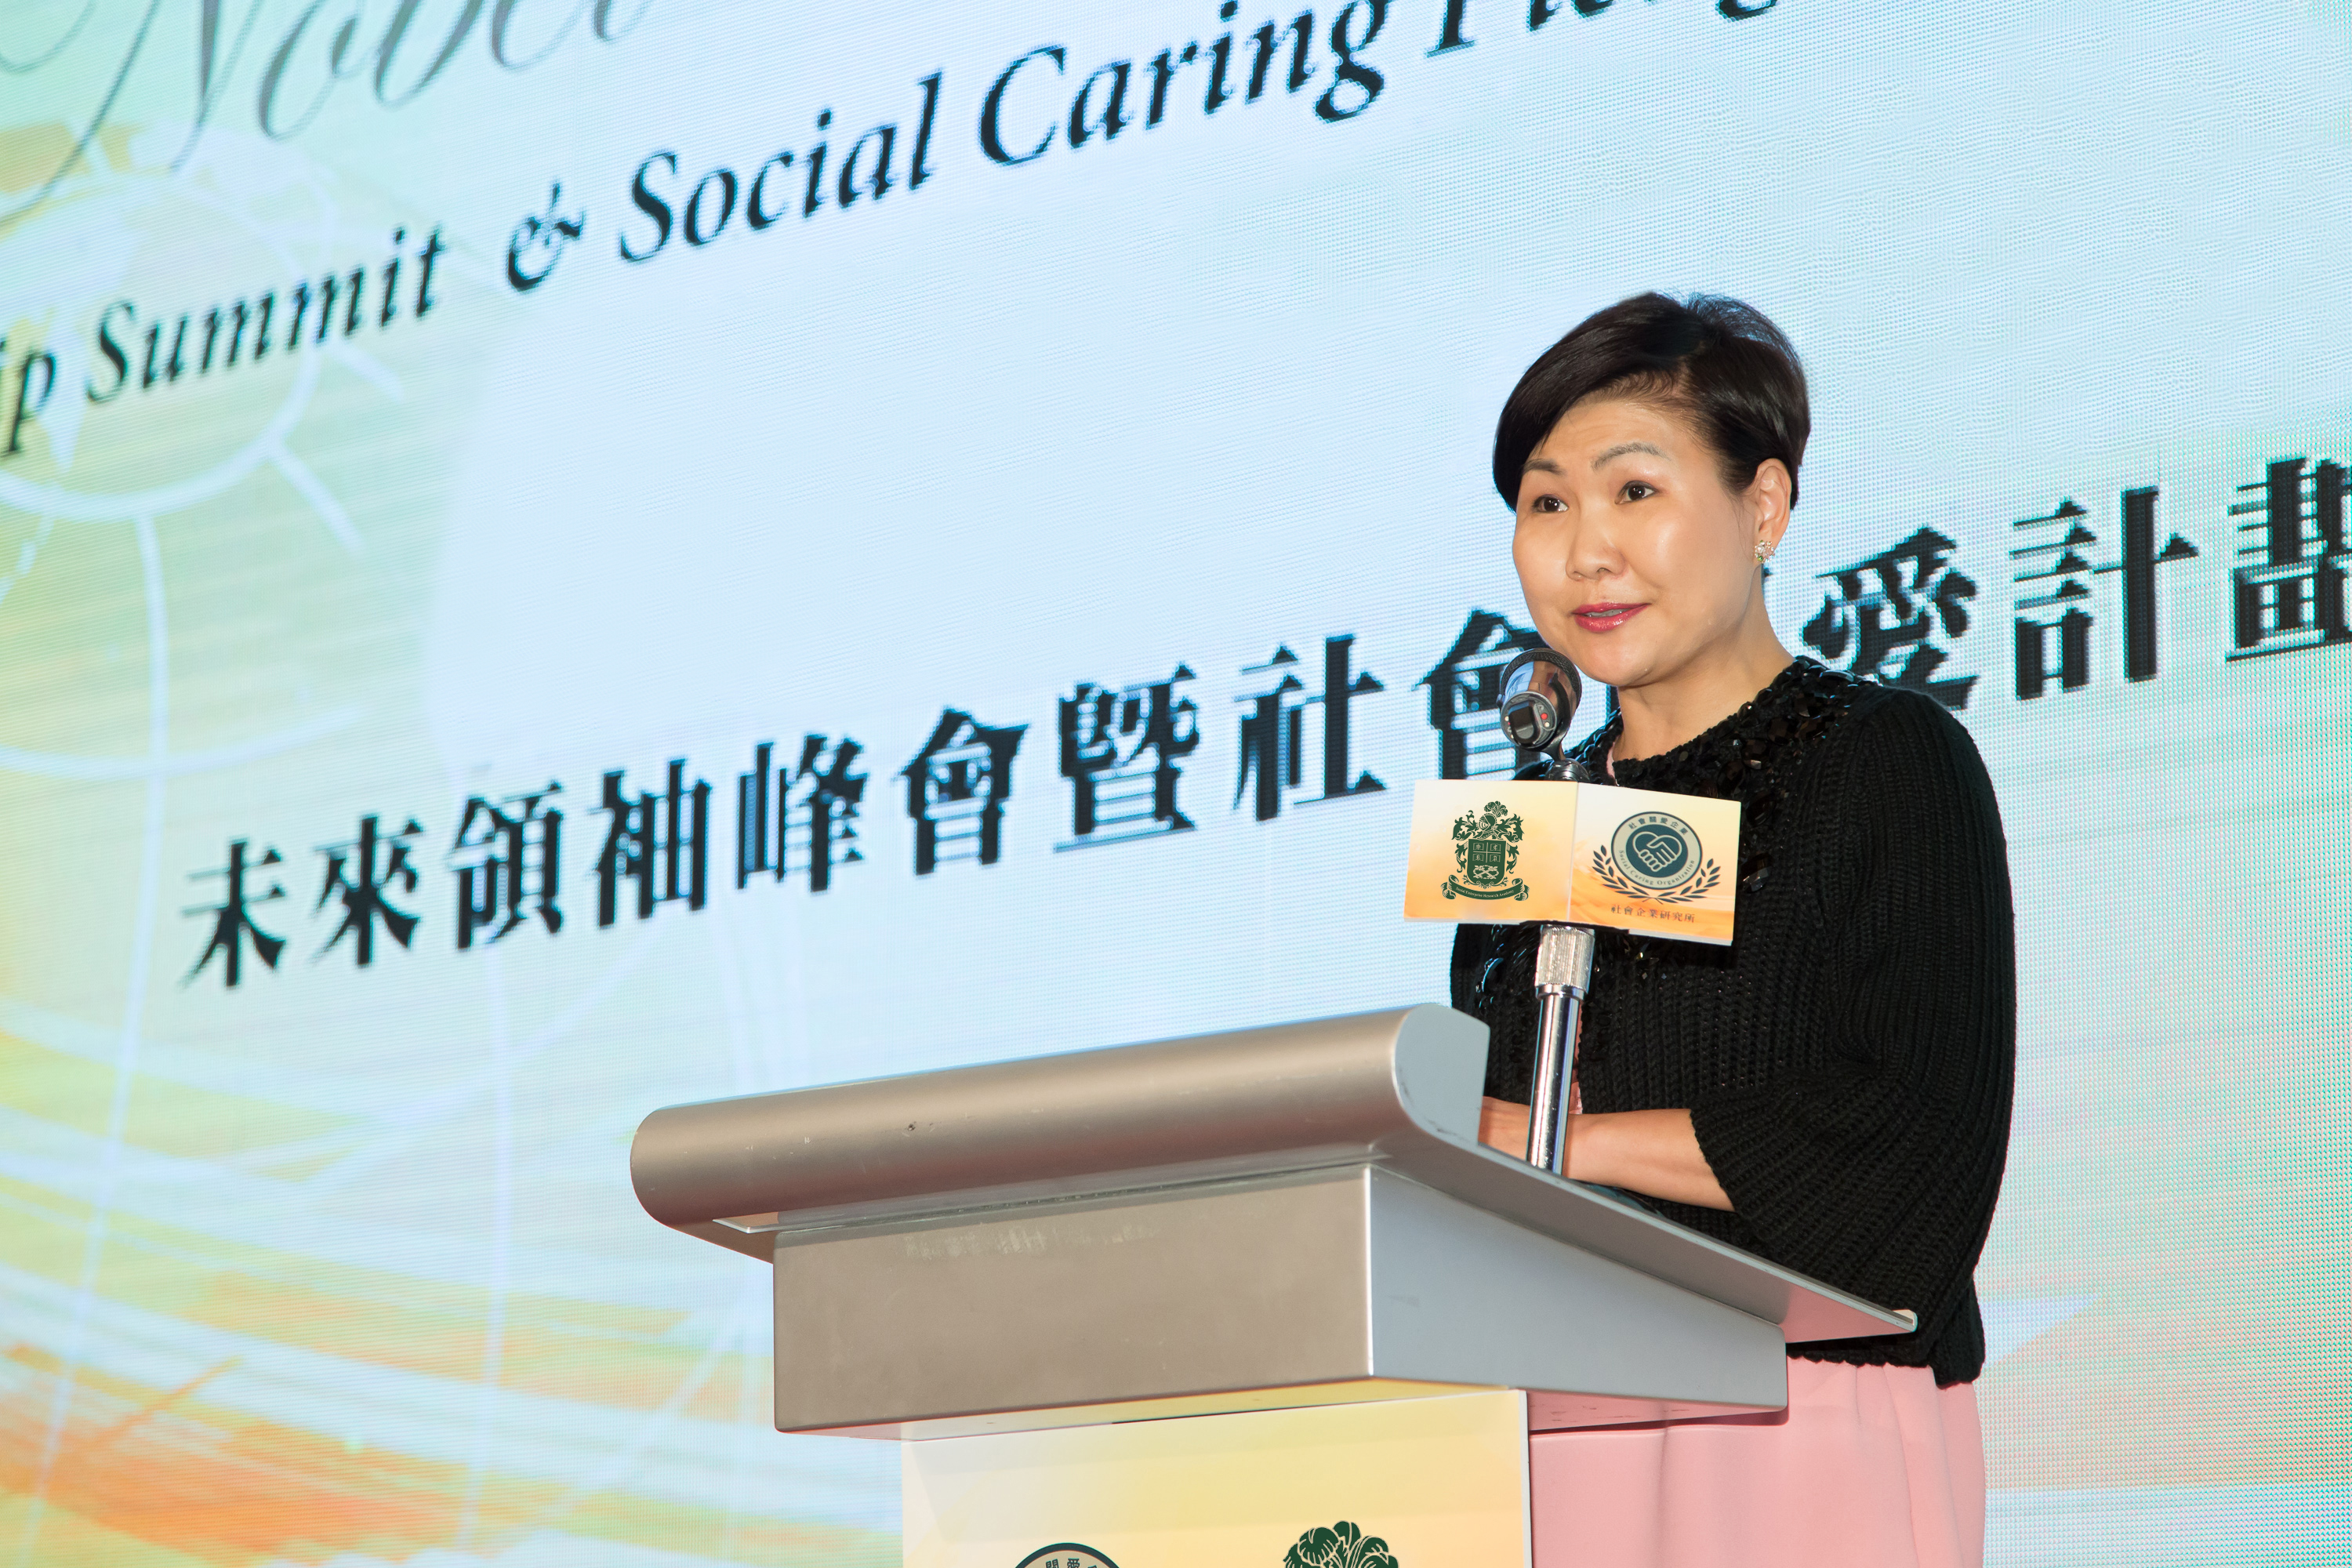 Ms. Gilly Wong, Chief Executive of Consumer Council’s keynote presentation that addressed the relationship between sustainable production and consumption.